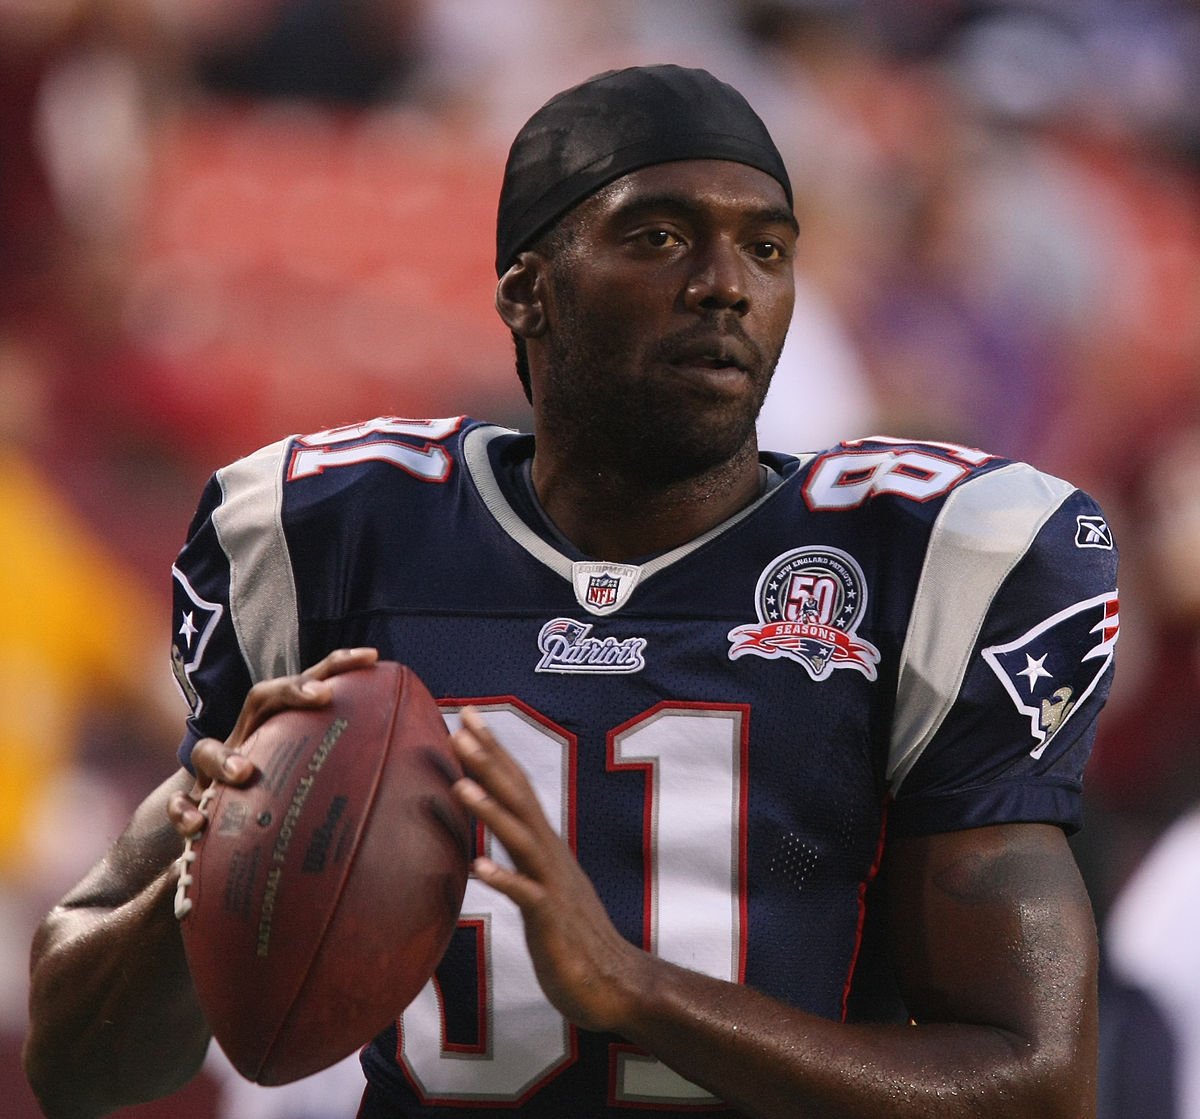 Also happy birthday to the one and only Randy Moss. 